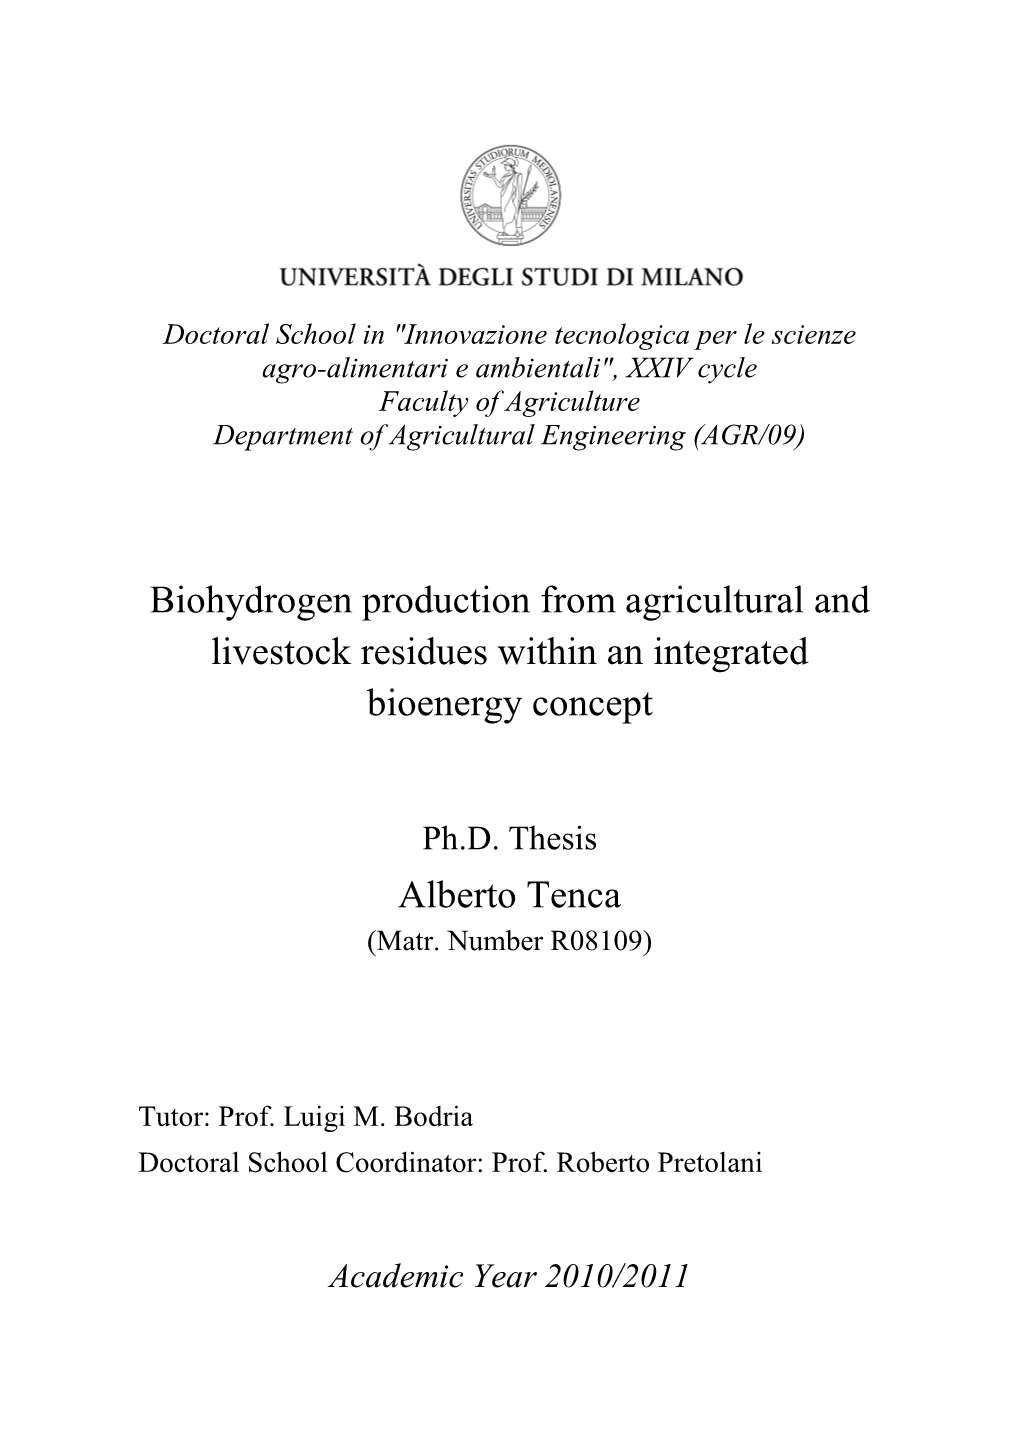 Biohydrogen Production from Agricultural and Livestock Residues Within an Integrated Bioenergy Concept